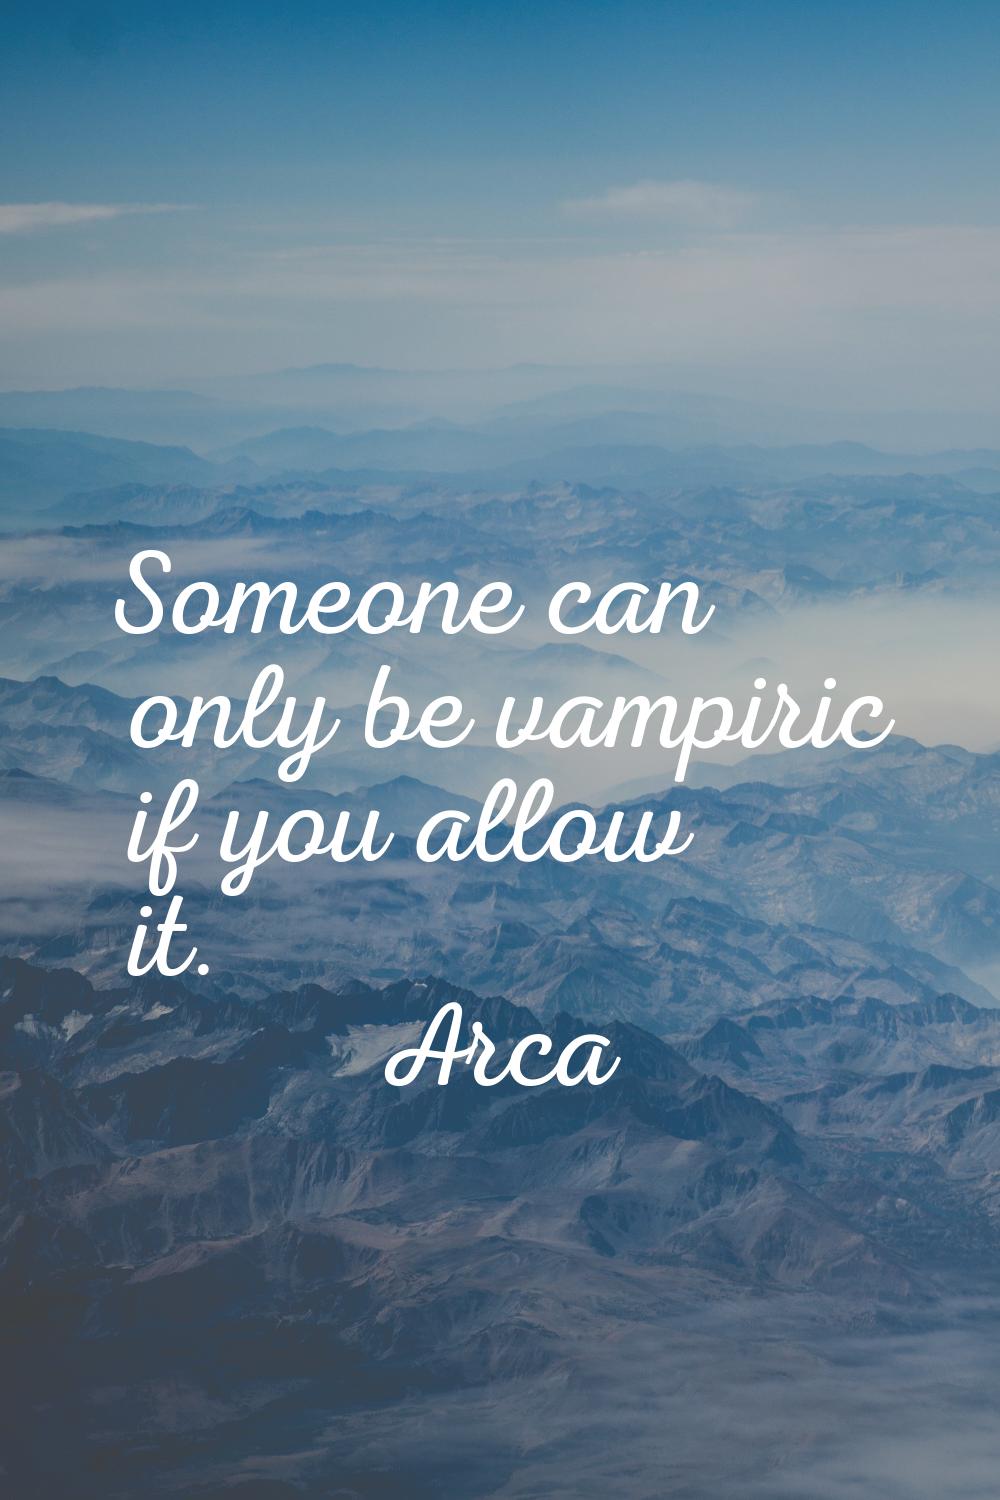 Someone can only be vampiric if you allow it.